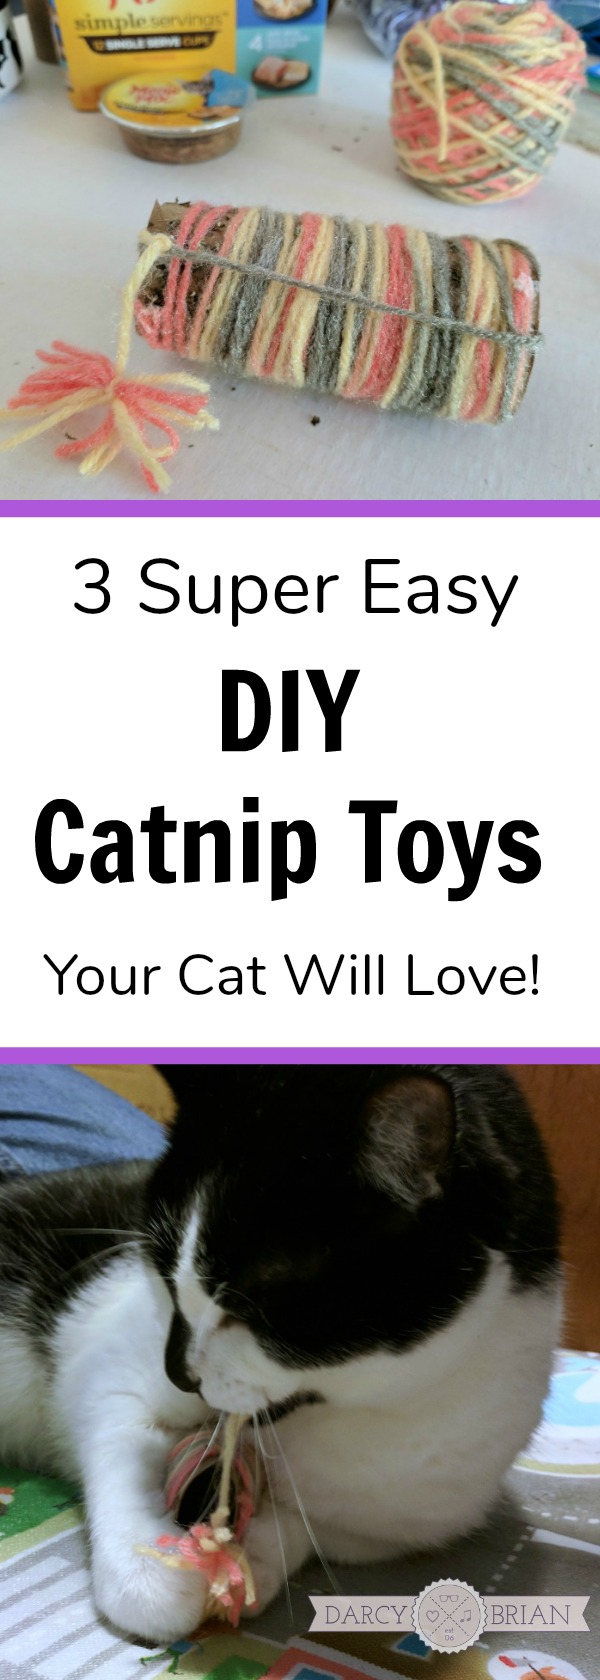 These homemade catnip toys are so easy to make and use simple supplies! Have an old sock that's missing its matching pair? Or an empty toilet paper tube? Click for the tutorial to make 3 DIY catnip toys. Your cat will think they are absolutely purrfect, but will act cool like they are no big deal. #MeowMixatMeijer #CollectiveBias #AD